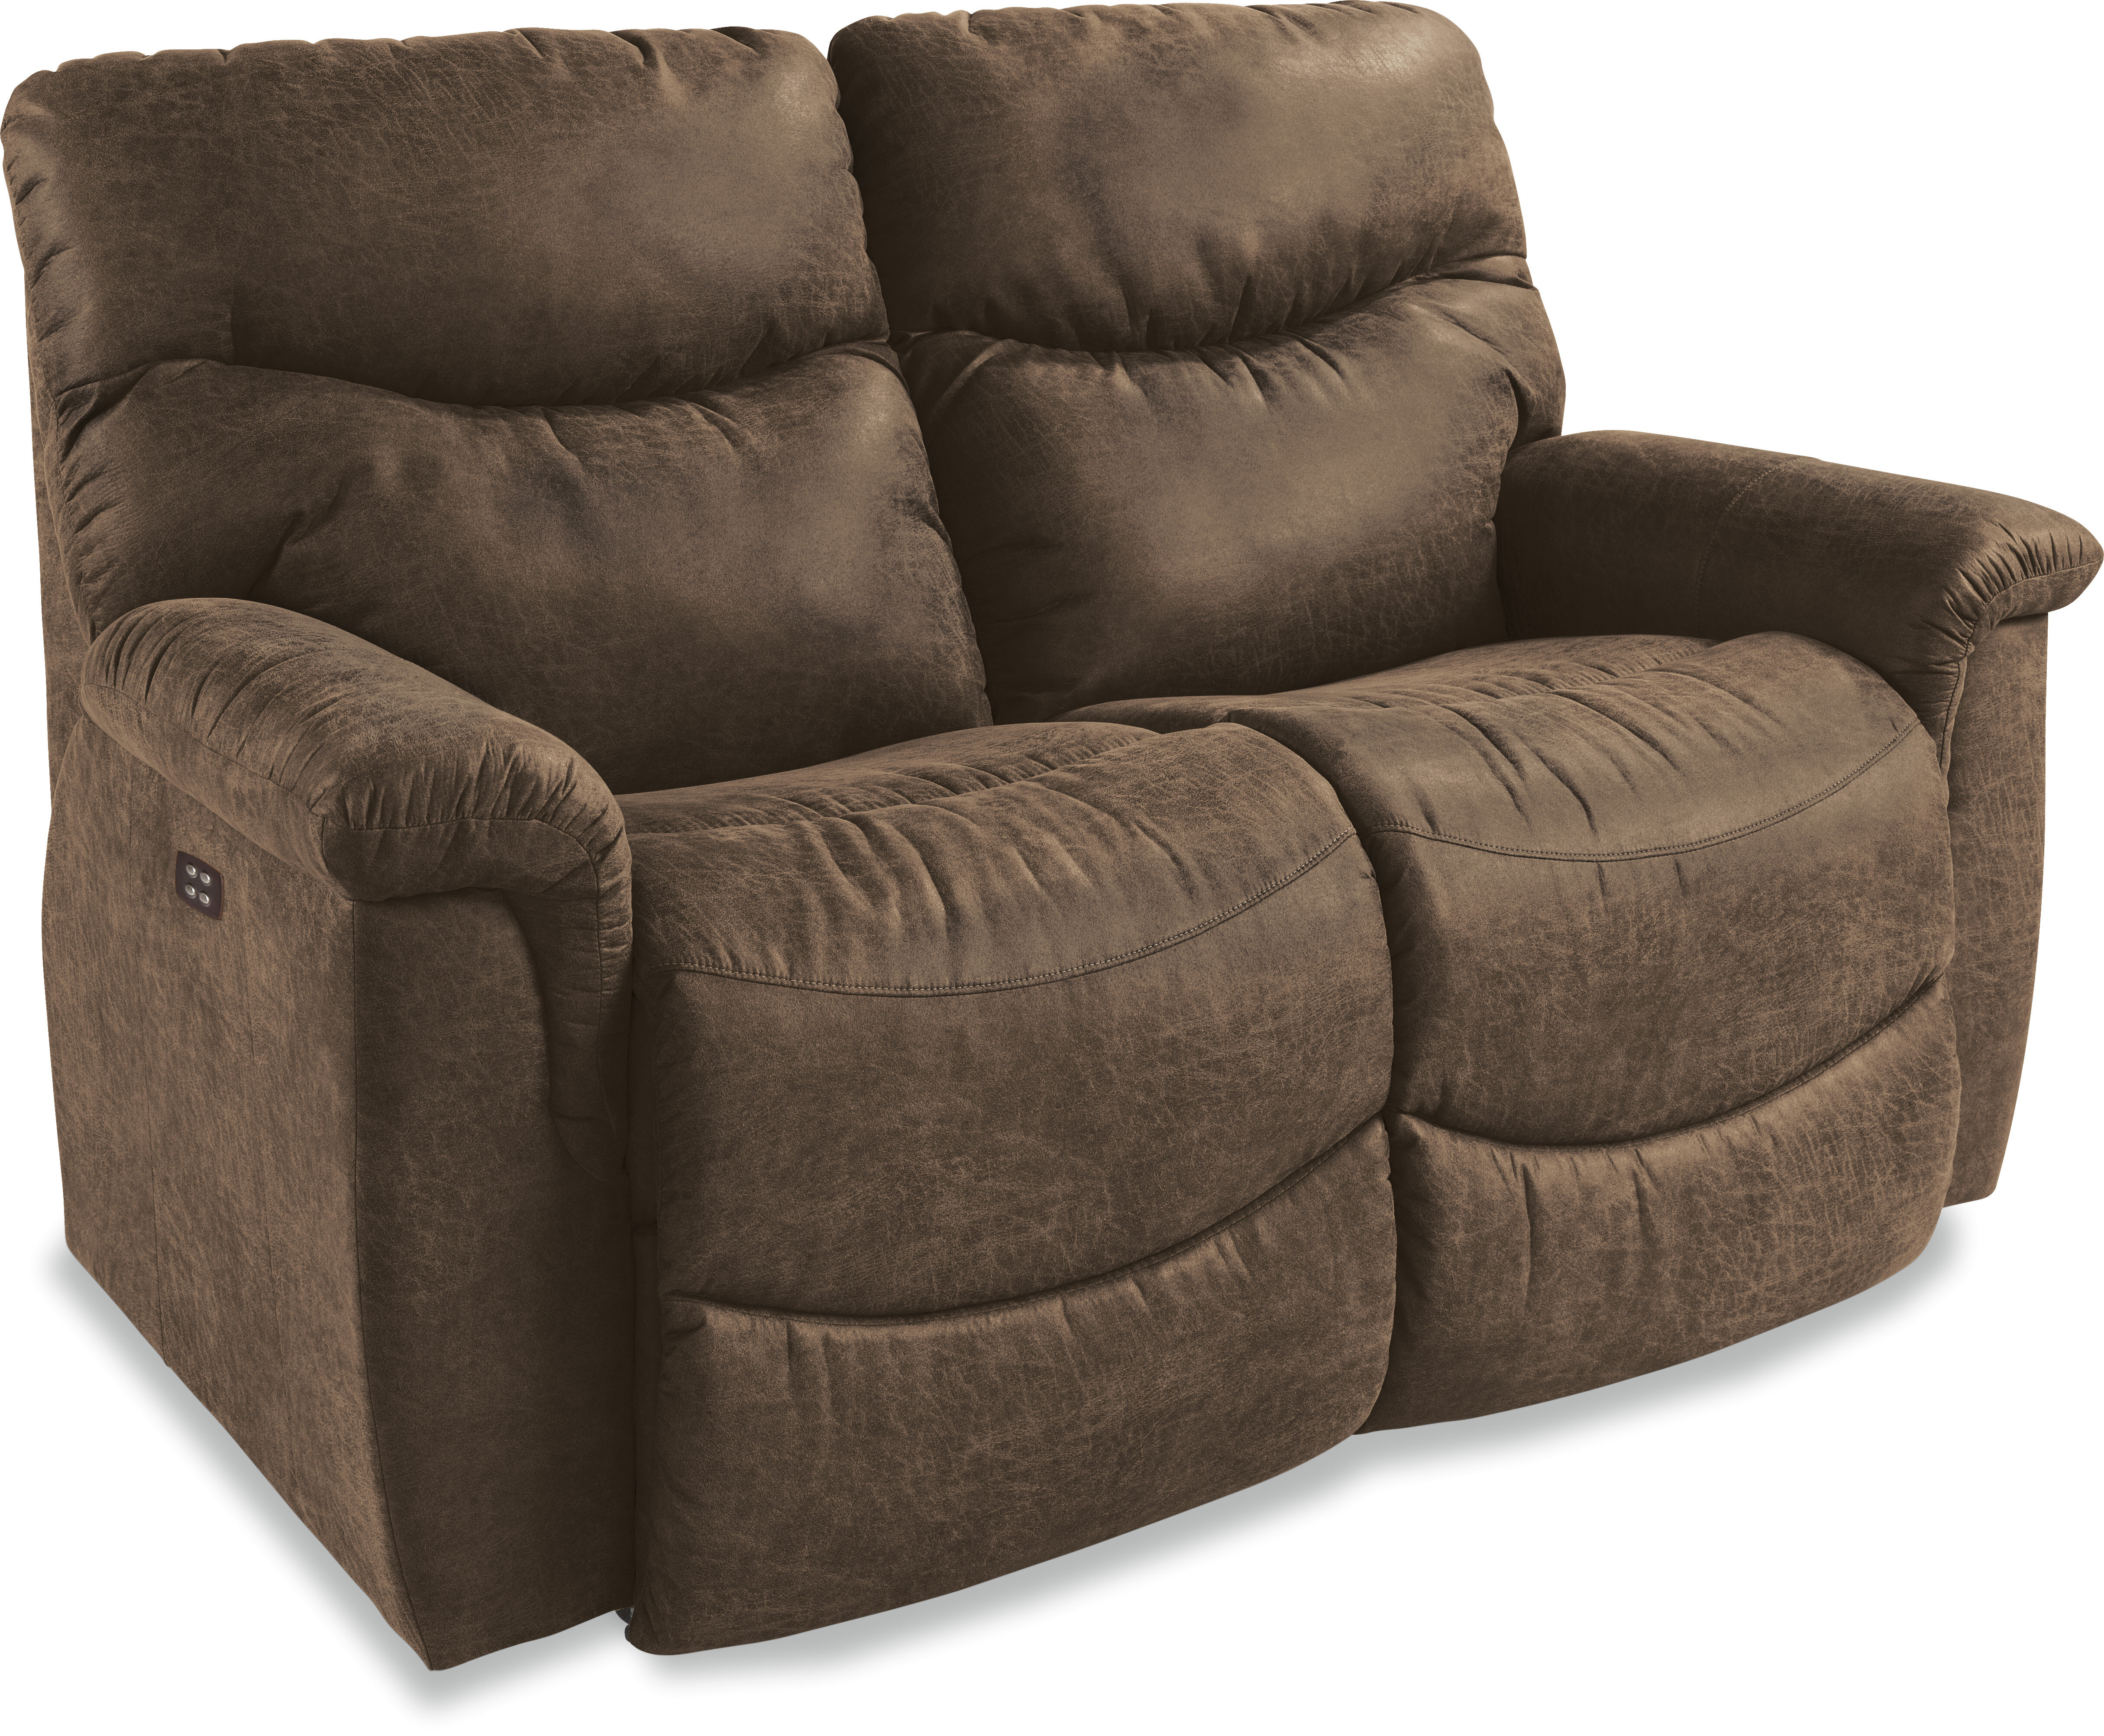 double recliner chair lazy boy